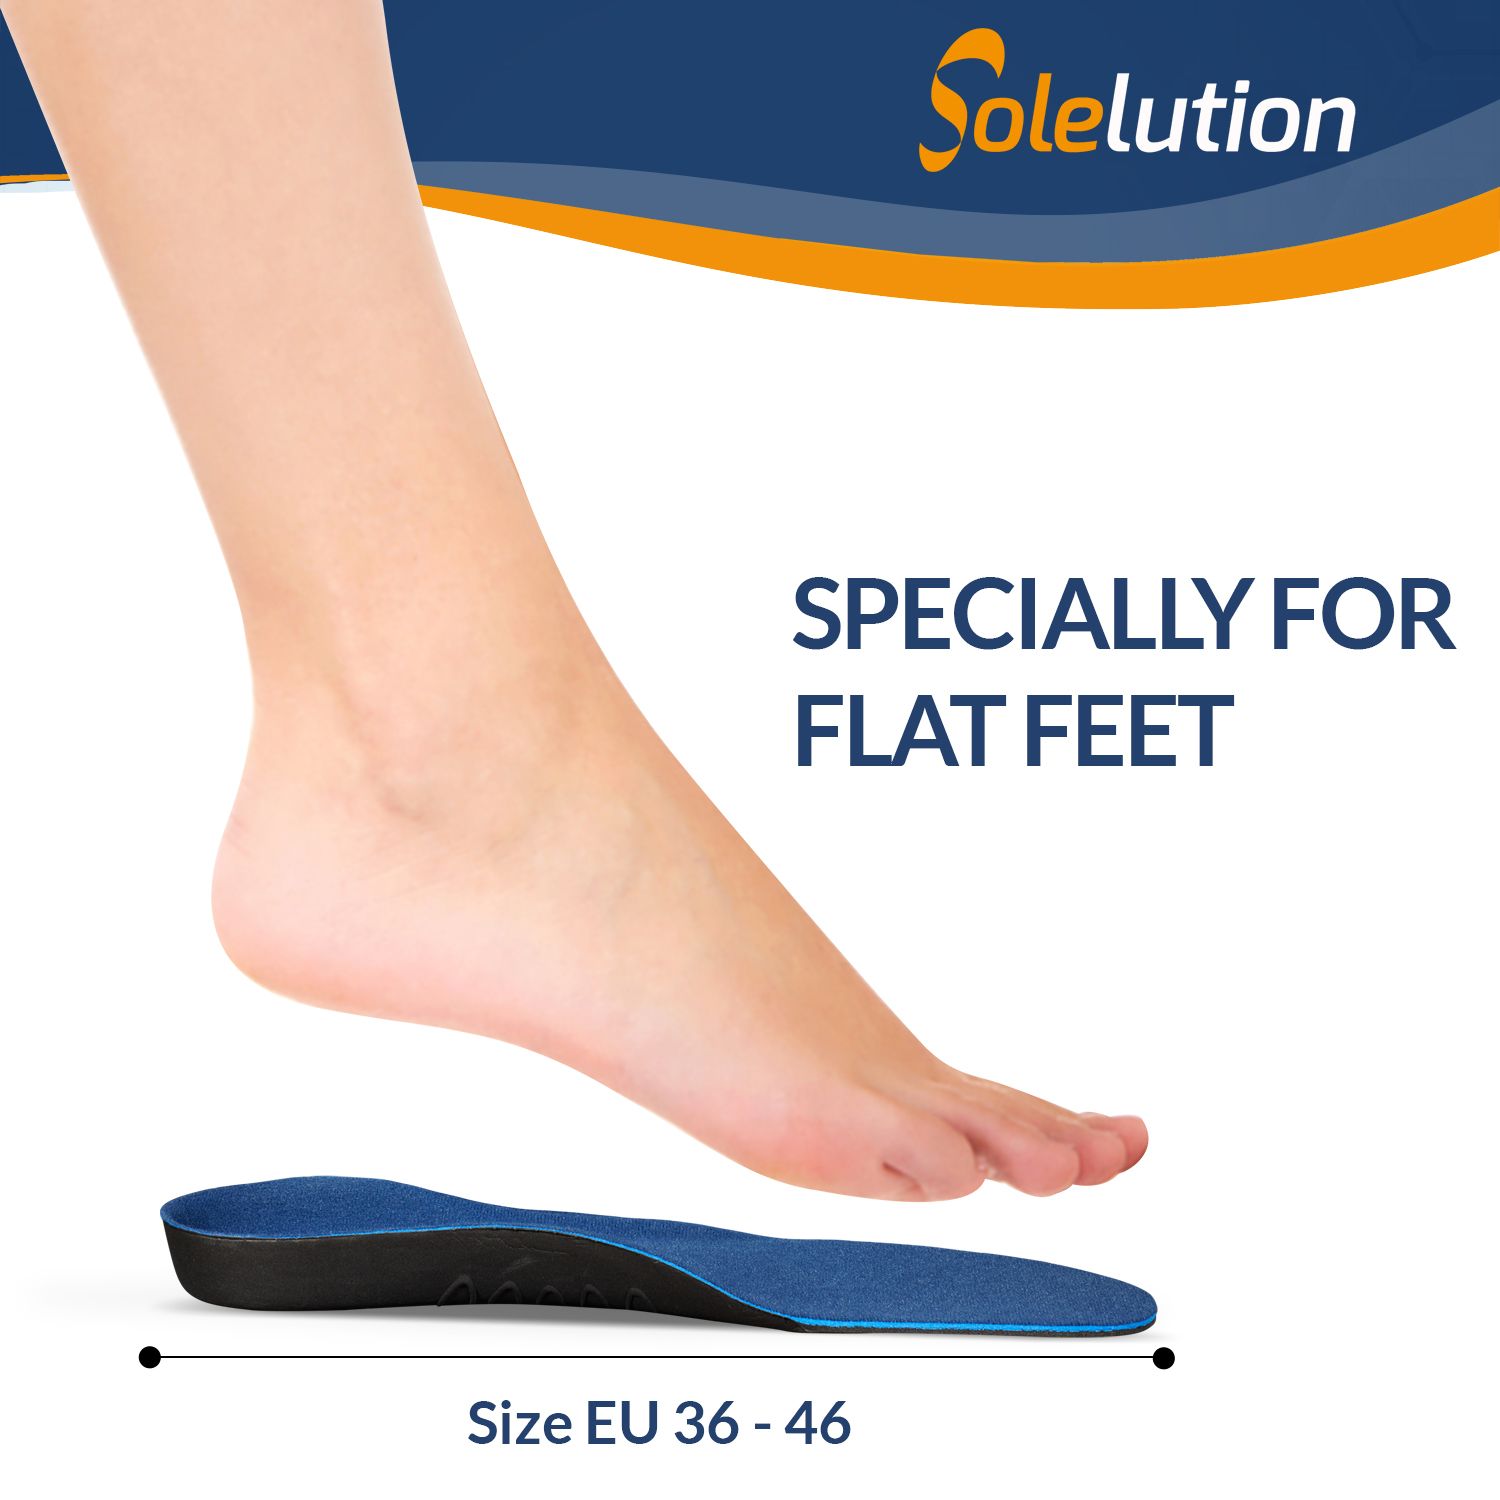 solelution flatfoot insoles product explanation